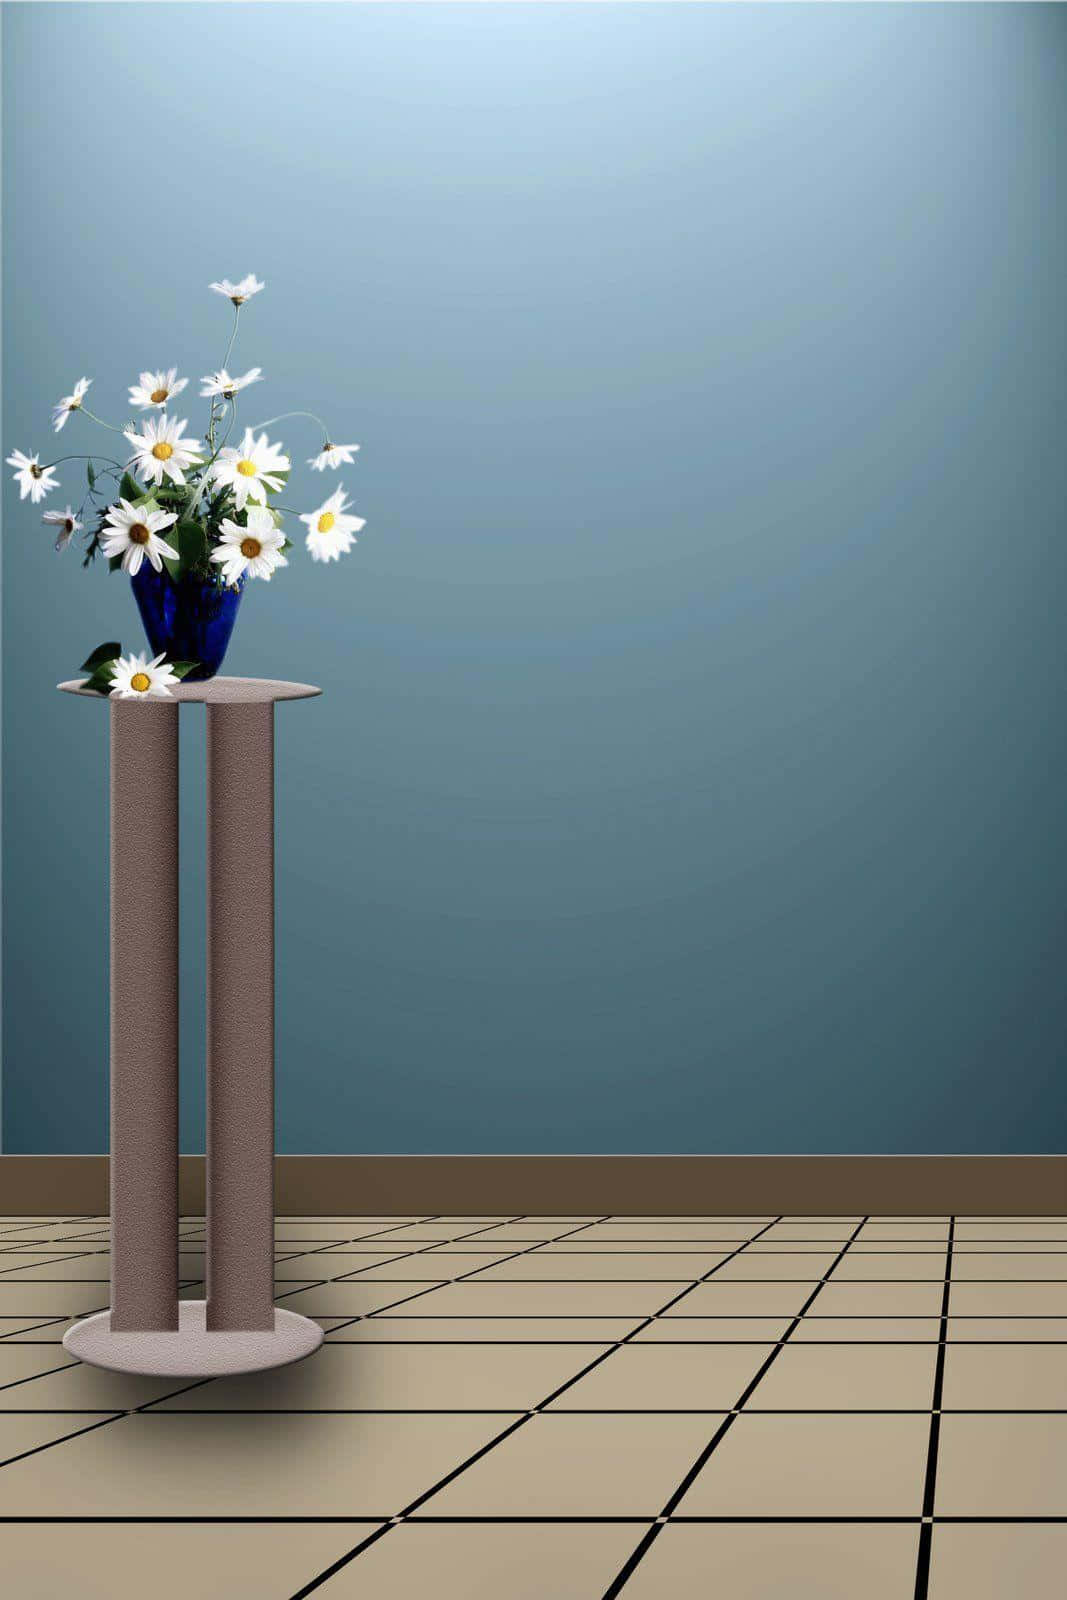 A Vase With Flowers In It